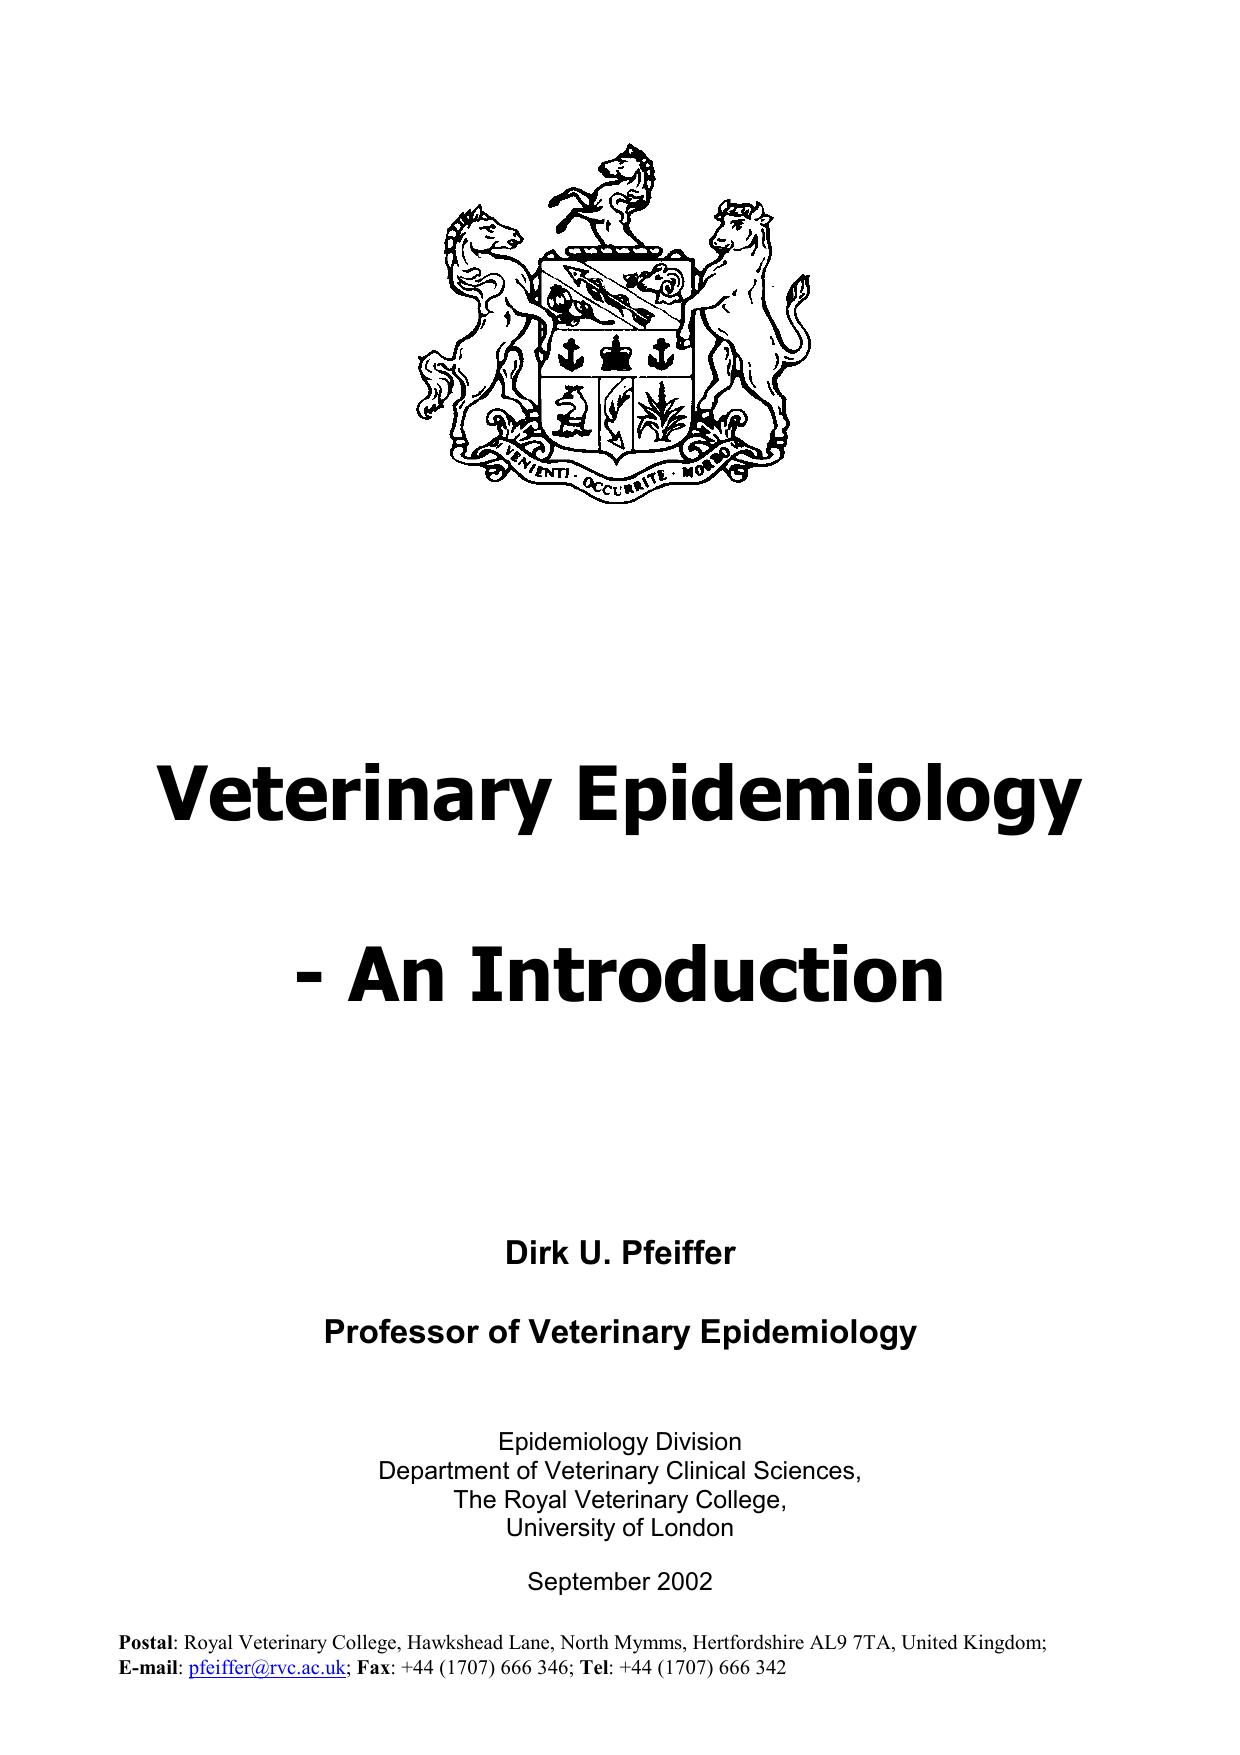 Veterinary Epidemiology, An Introduction